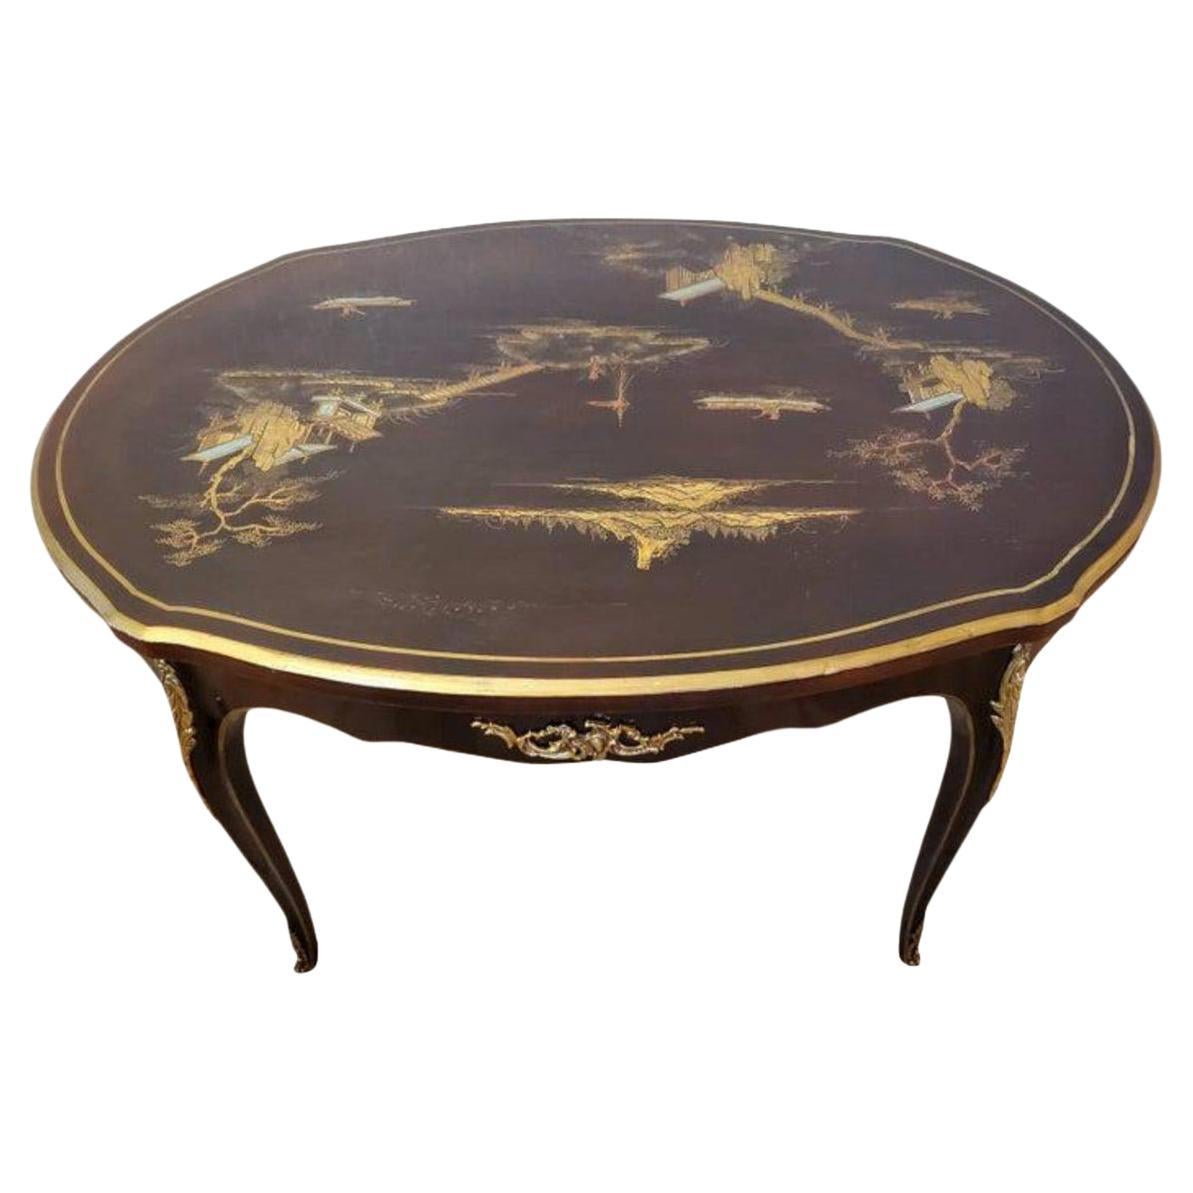 French Louis XV Chinoiserie Coffee Table, Attributed to Escalier de Cristal